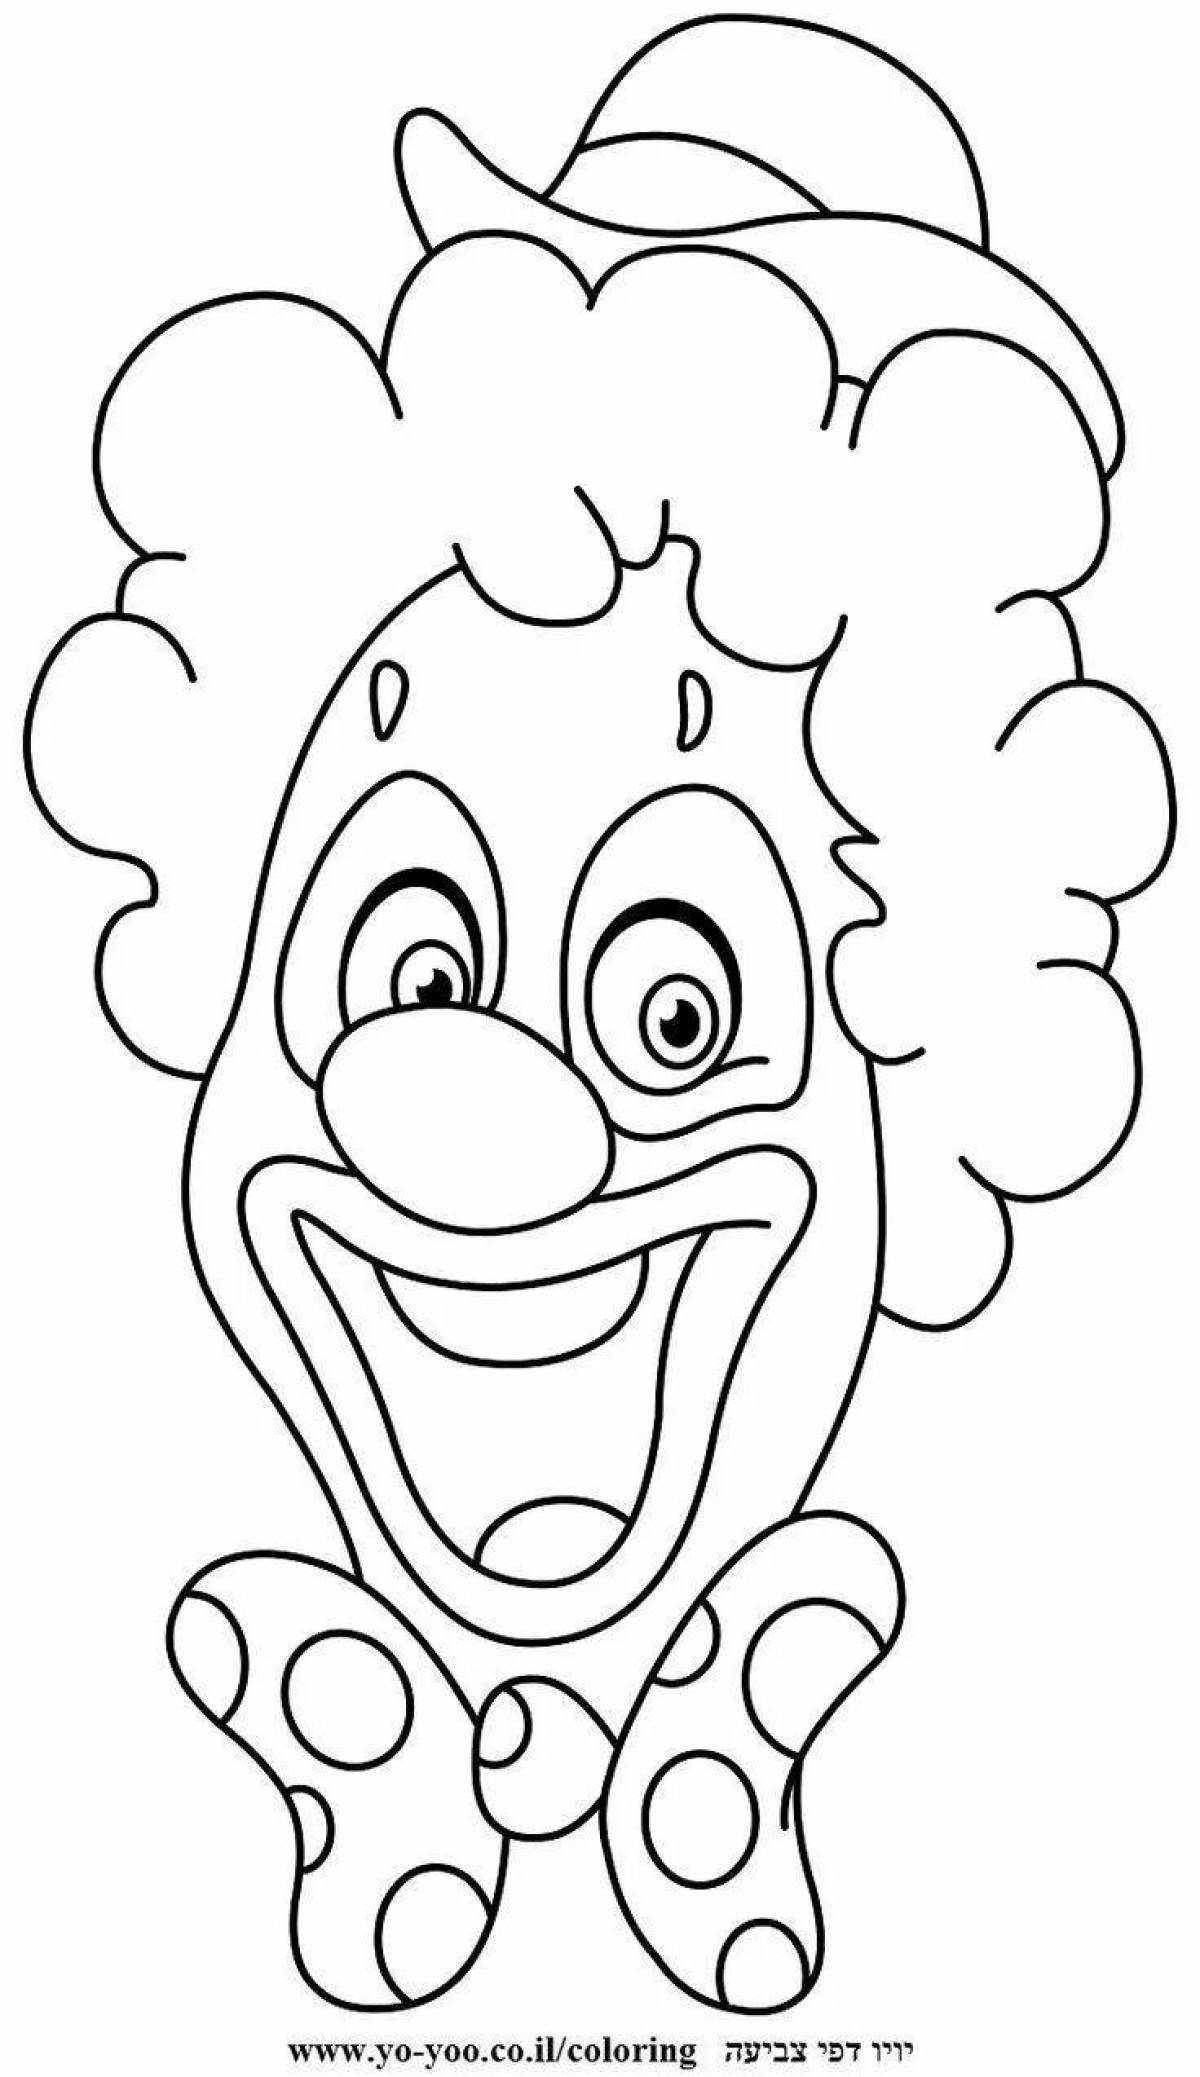 Playful clown face coloring page